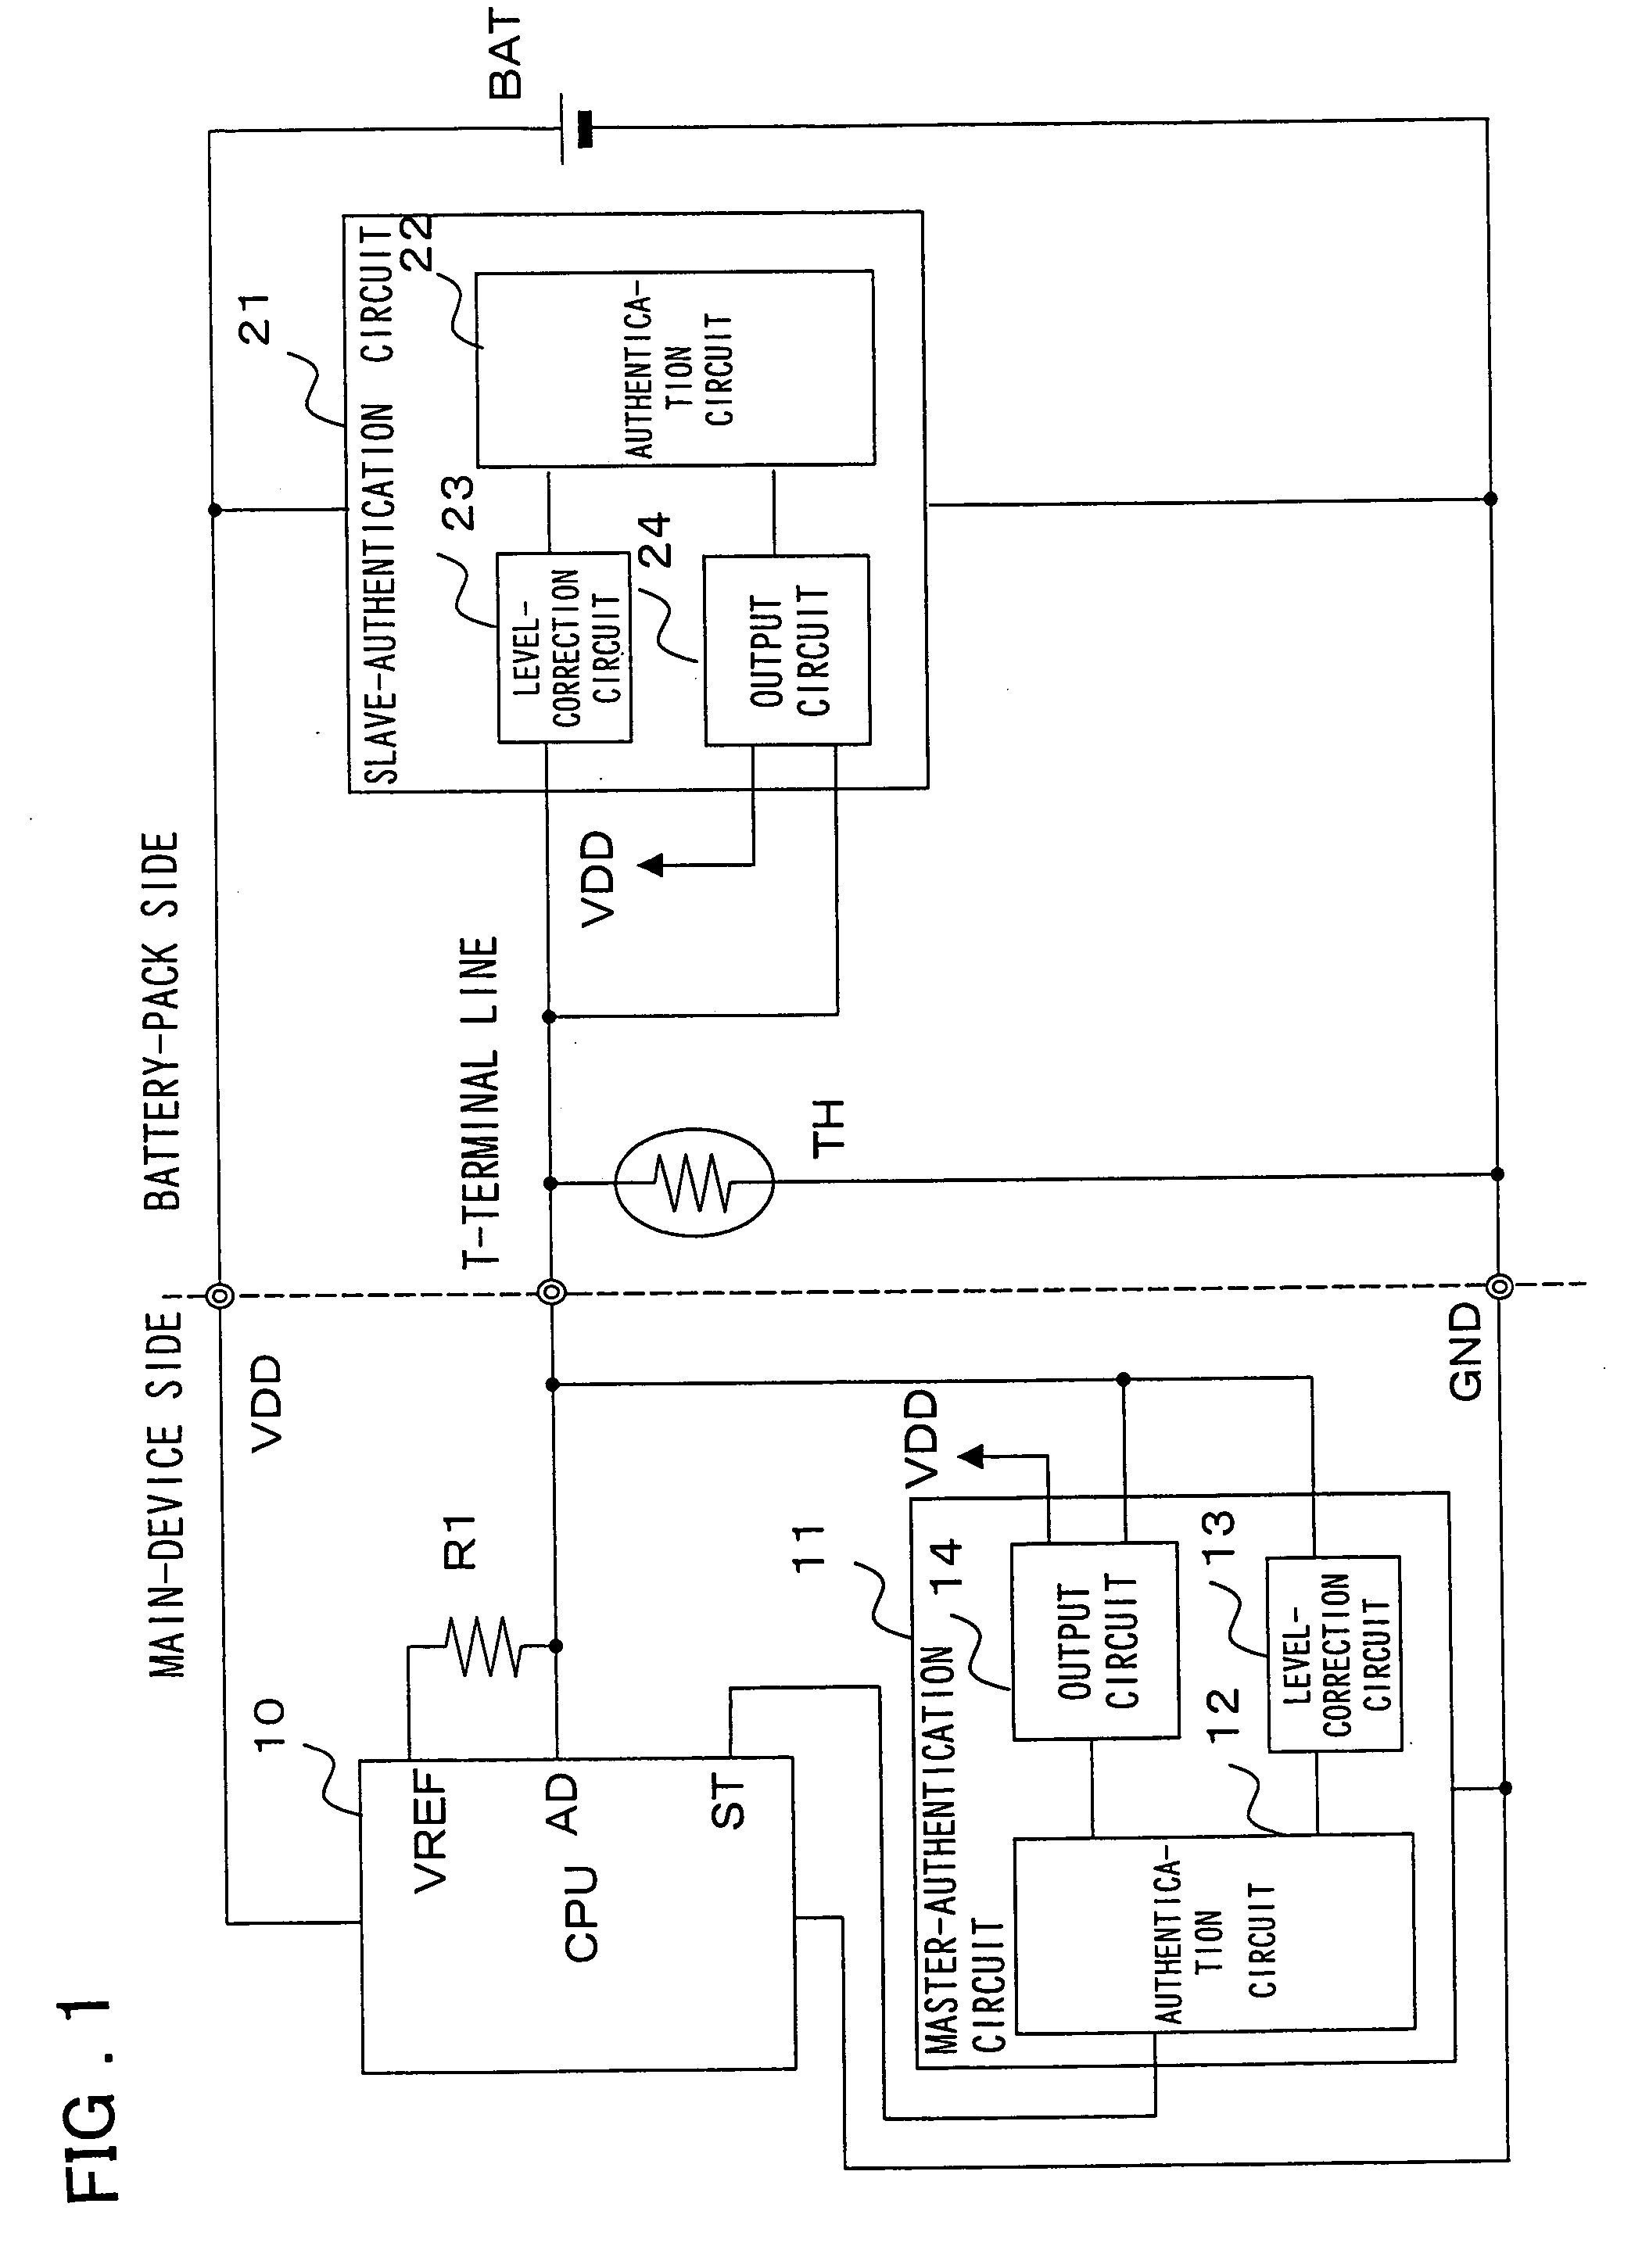 Data authentication circuit, battery pack and portable electronic device